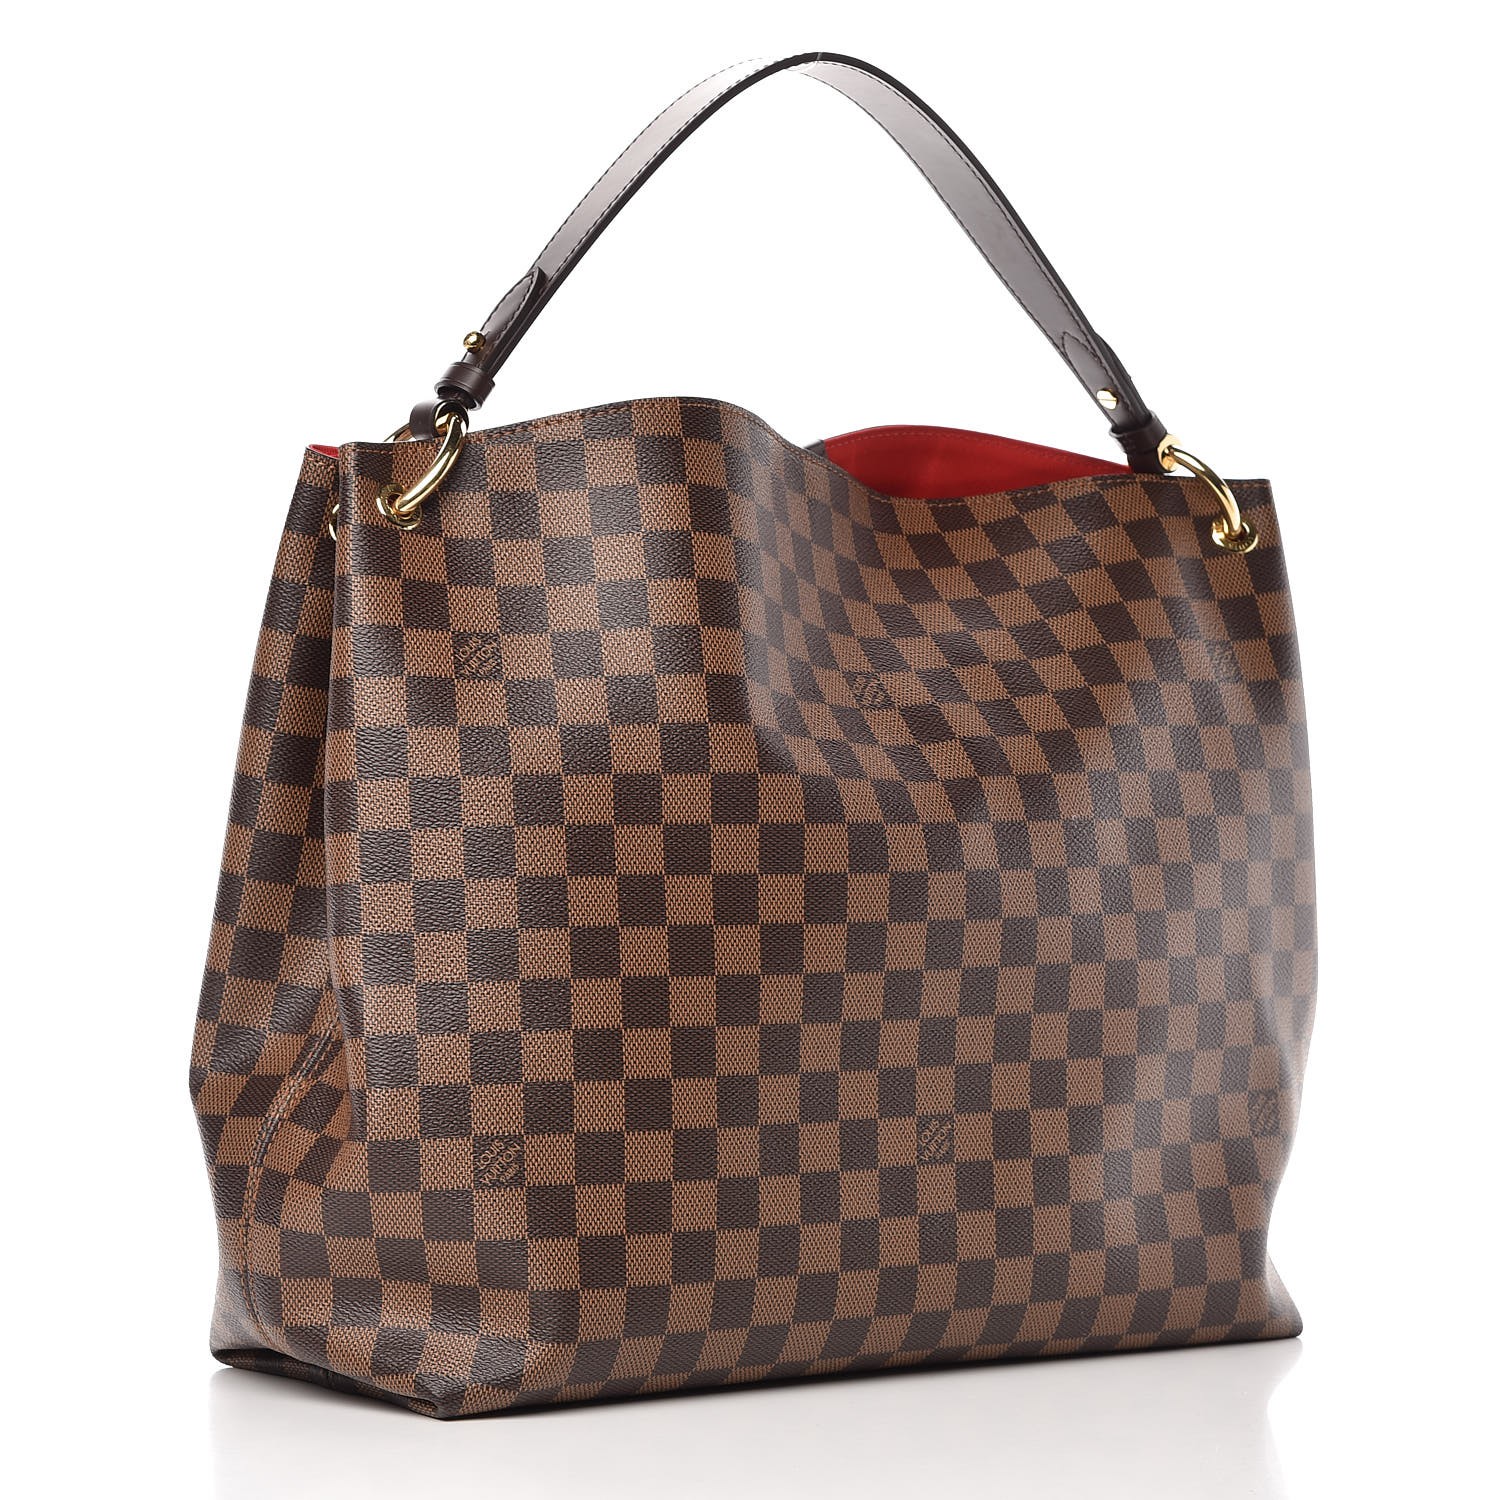 Best Louis Vuitton # M51980 for sale in Brazoria County, Texas for